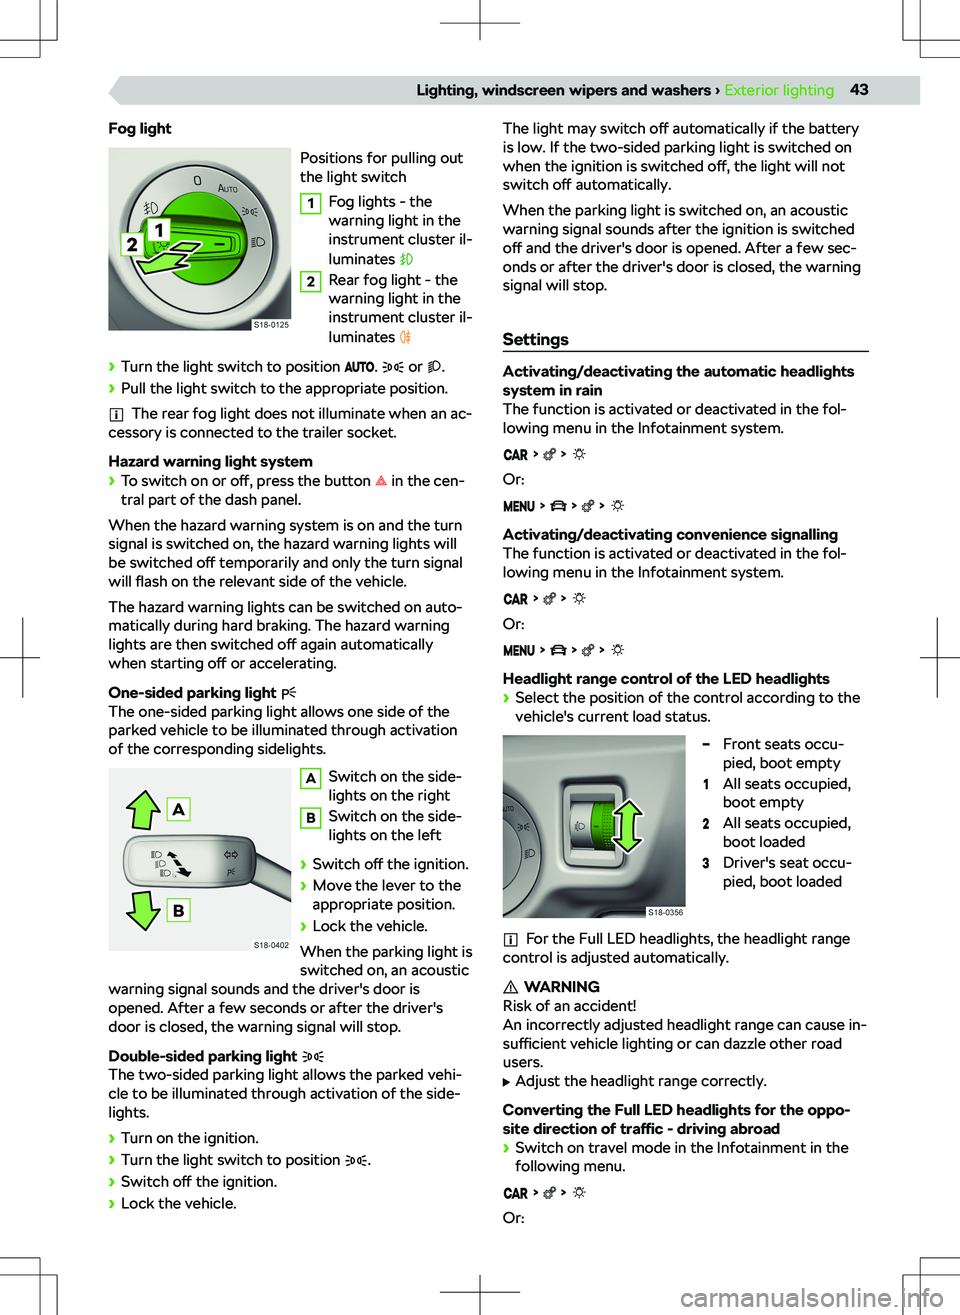 SKODA KAMIQ 2020  Owner´s Manual Fog lightPositions for pulling out
the light switch1
Fog lights - the
warning light in the
instrument cluster il-
luminates 
2
Rear fog light - the
warning light in the
instrument cluster il-
luminate